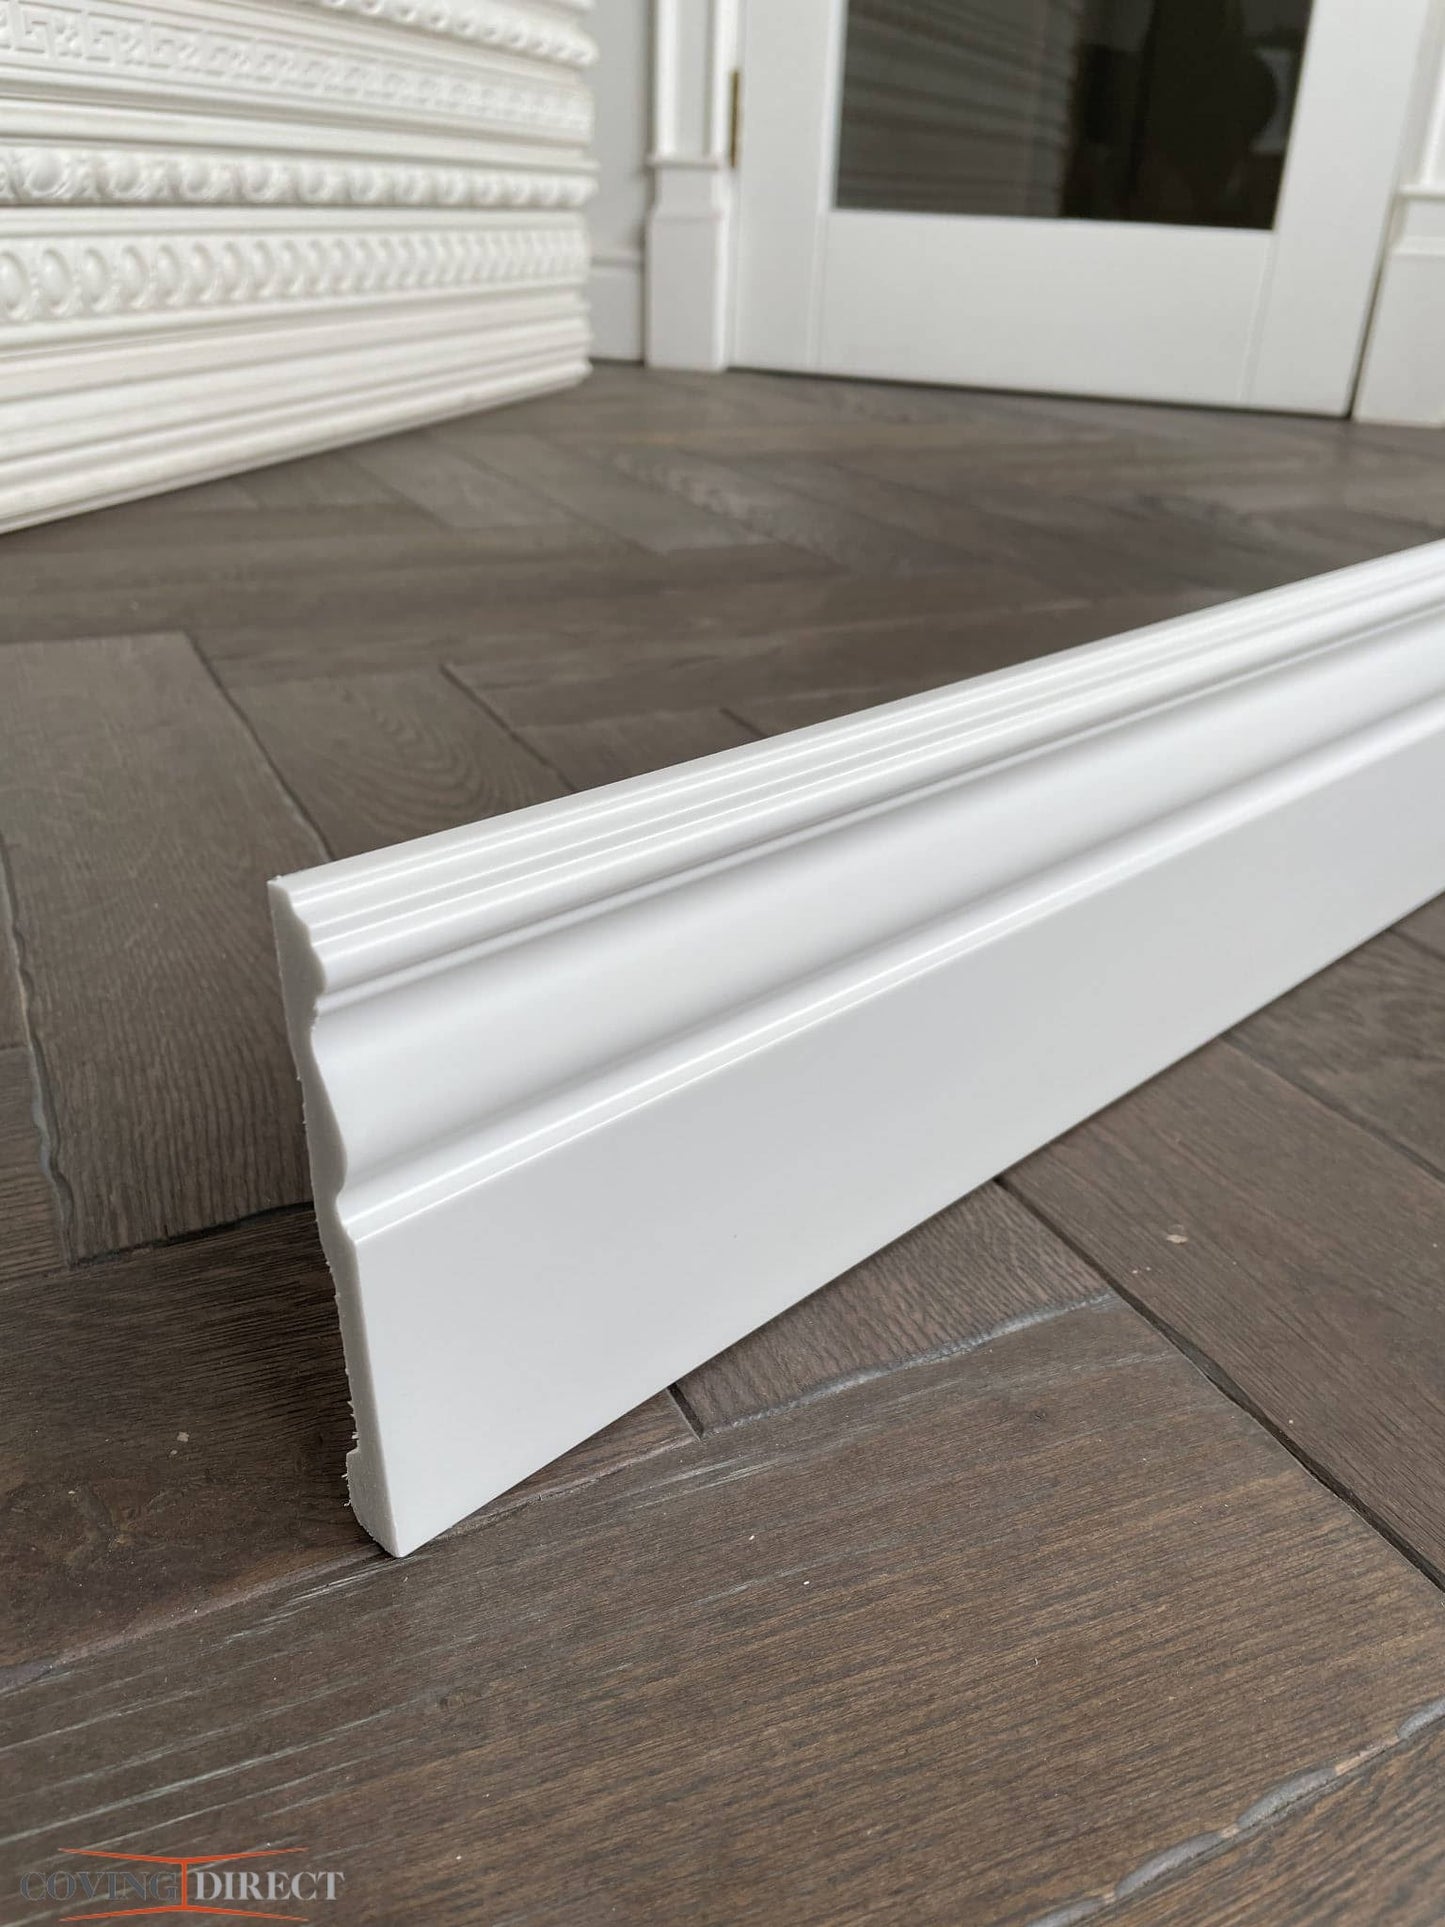 MD095P - Skirting Board on a wooden floor